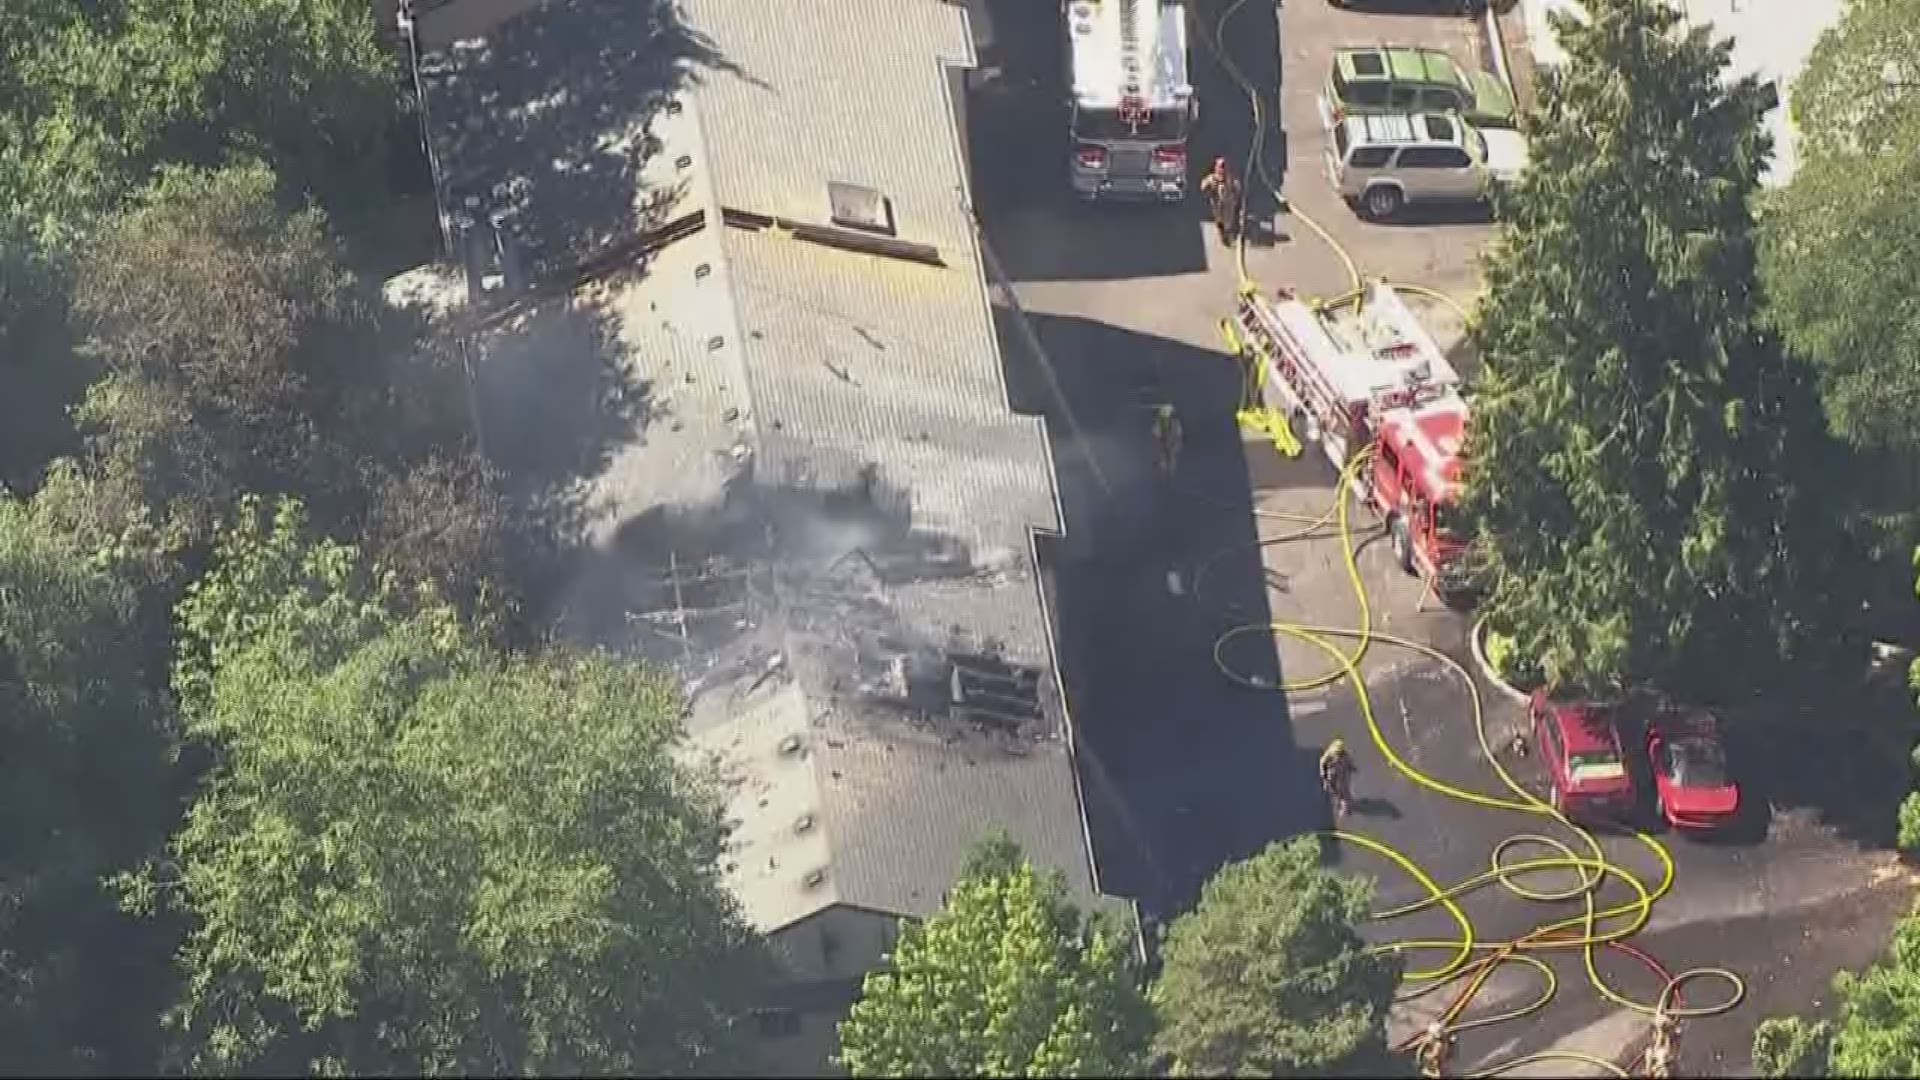 A man died after jumping out of a burning apartment building in Southwest Portland.